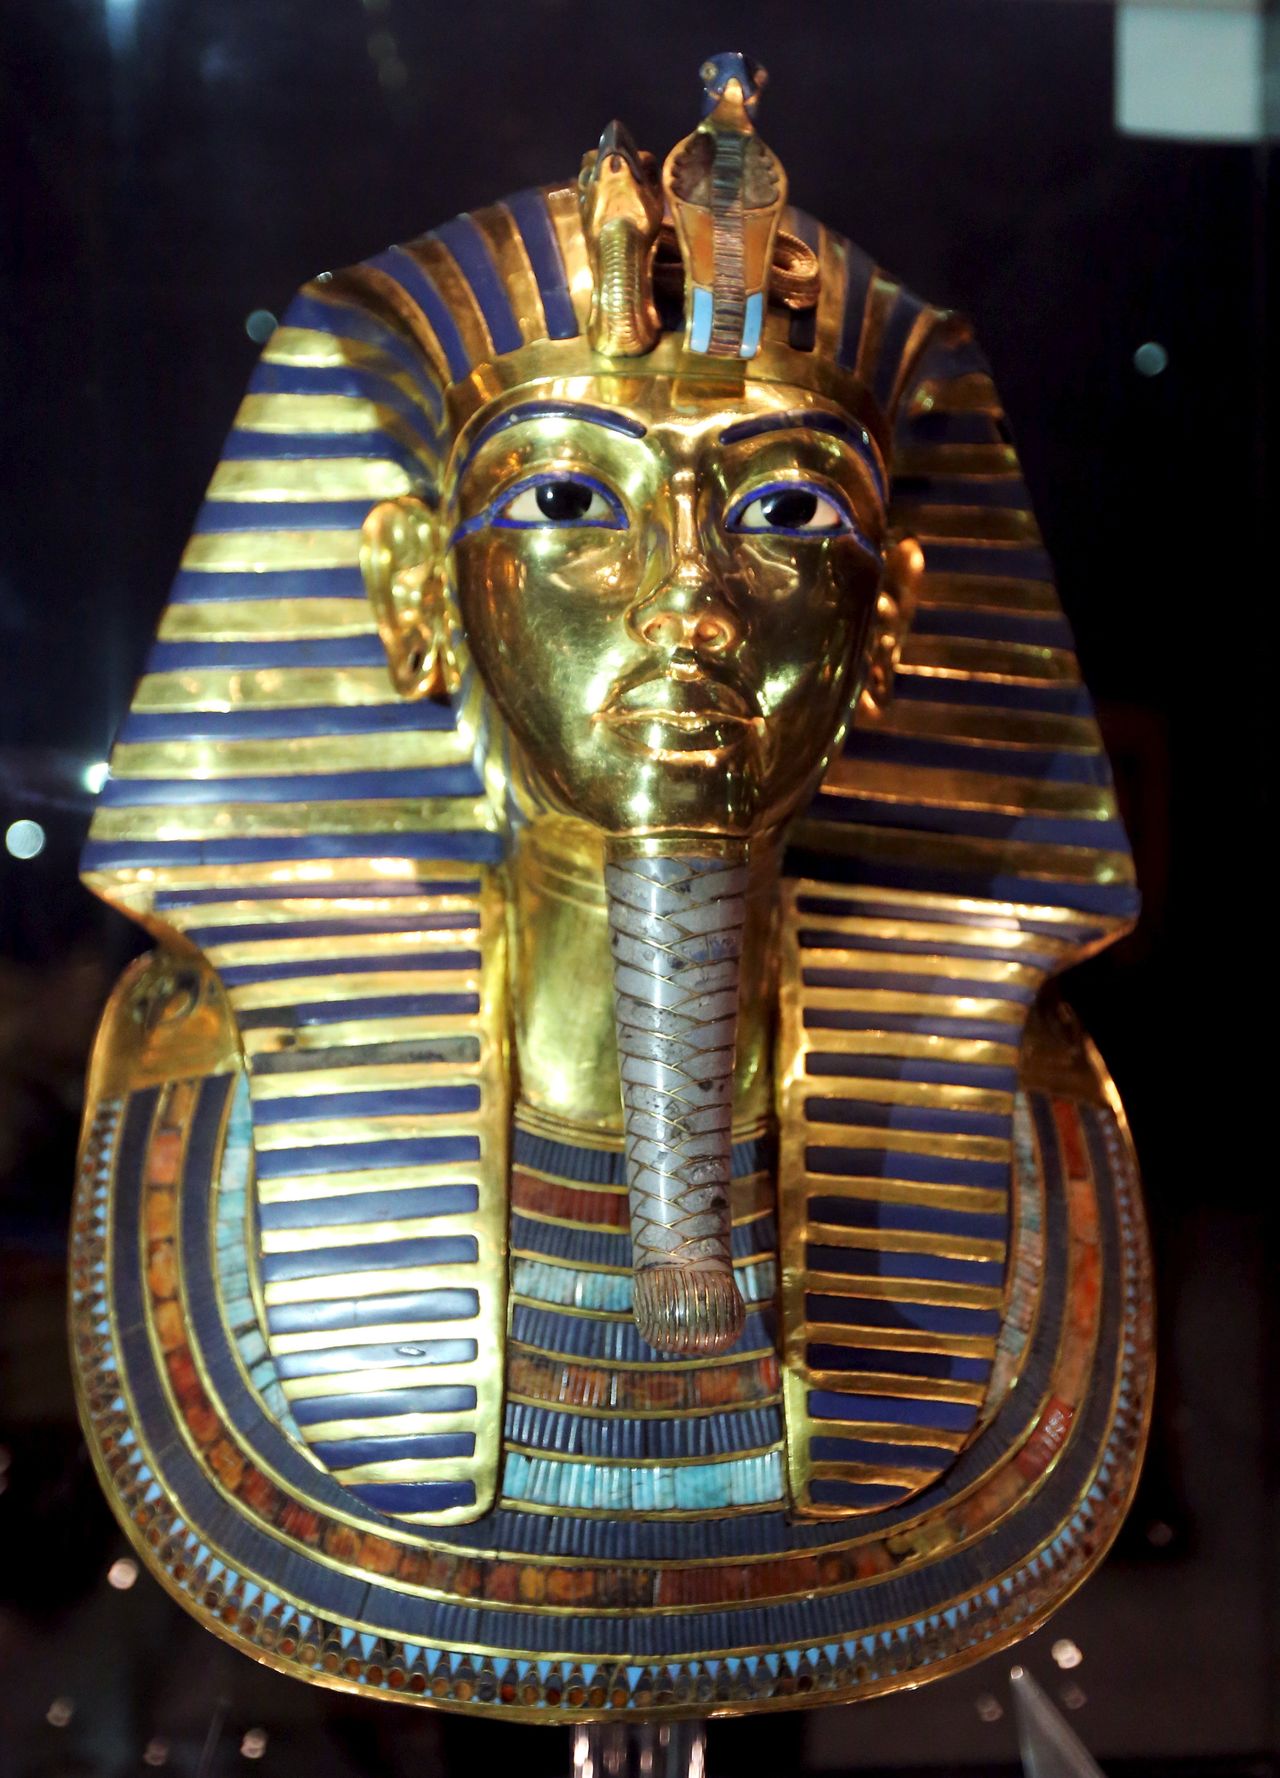 The golden mask of King Tutankhamun is displayed inside a glass cabinet at the Egyptian Museum in Cairo, Egypt